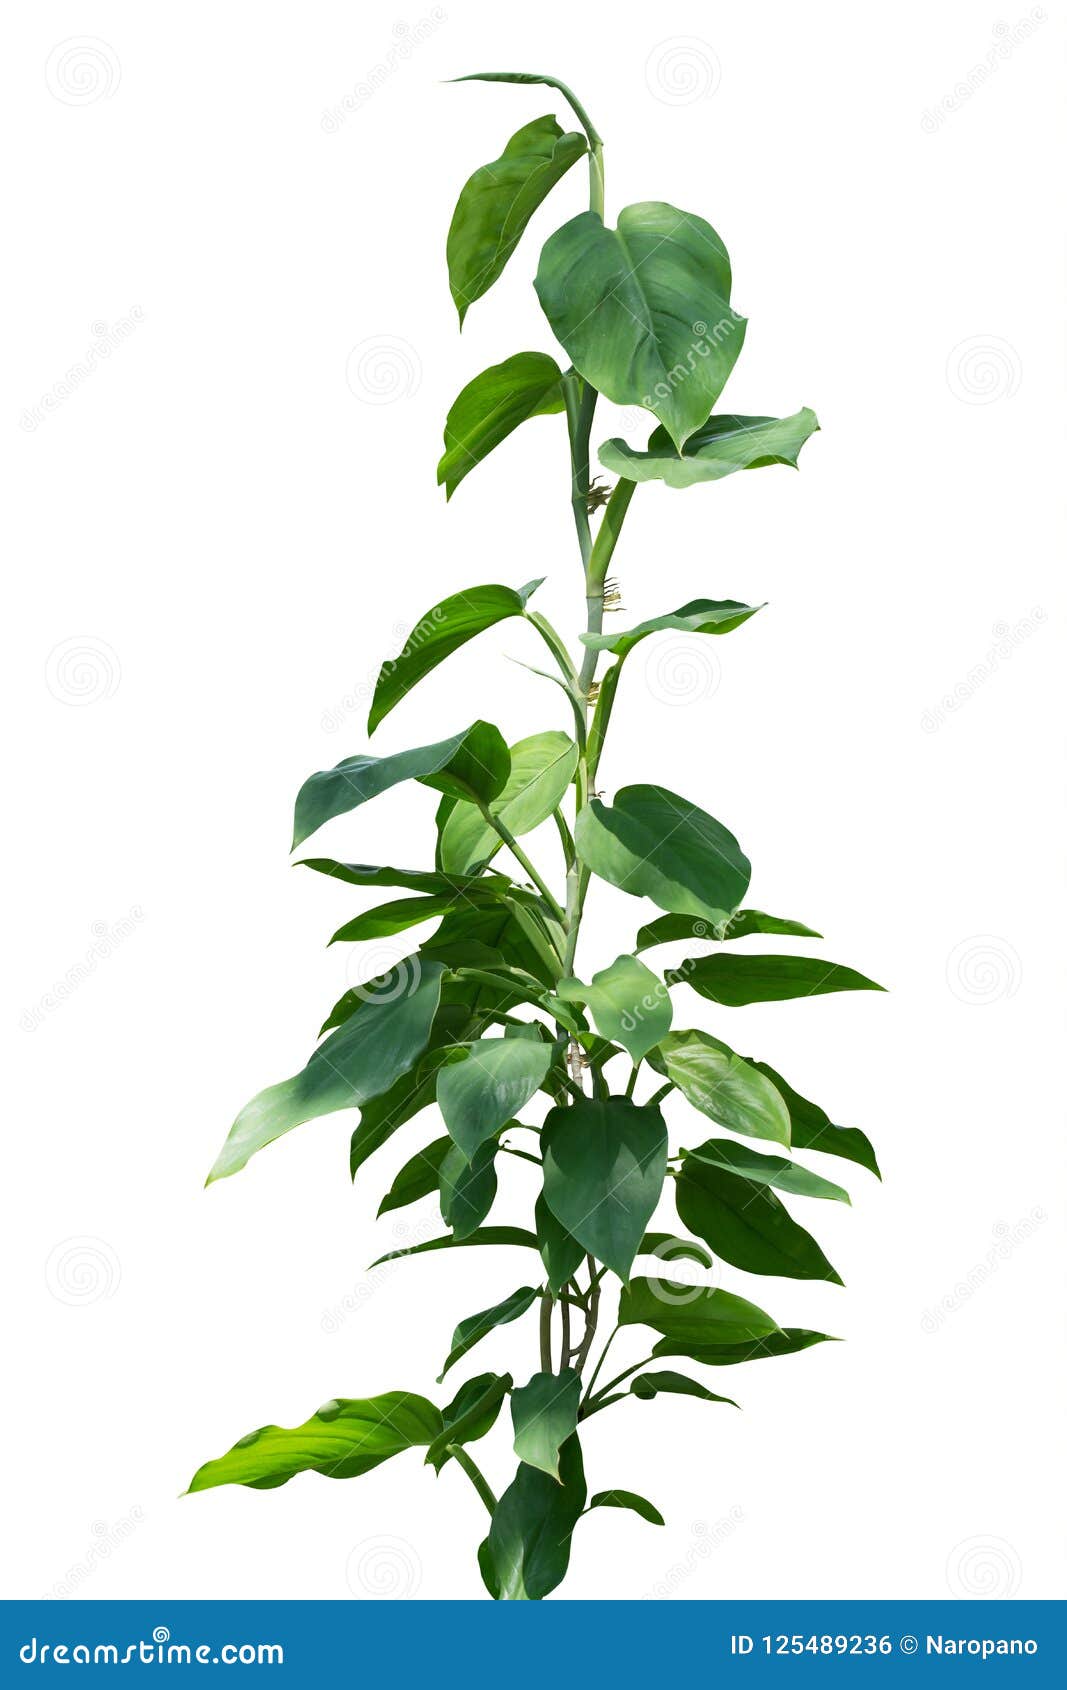 Vine Plants Isolated On White Background, Clipping Path. Stock Photo